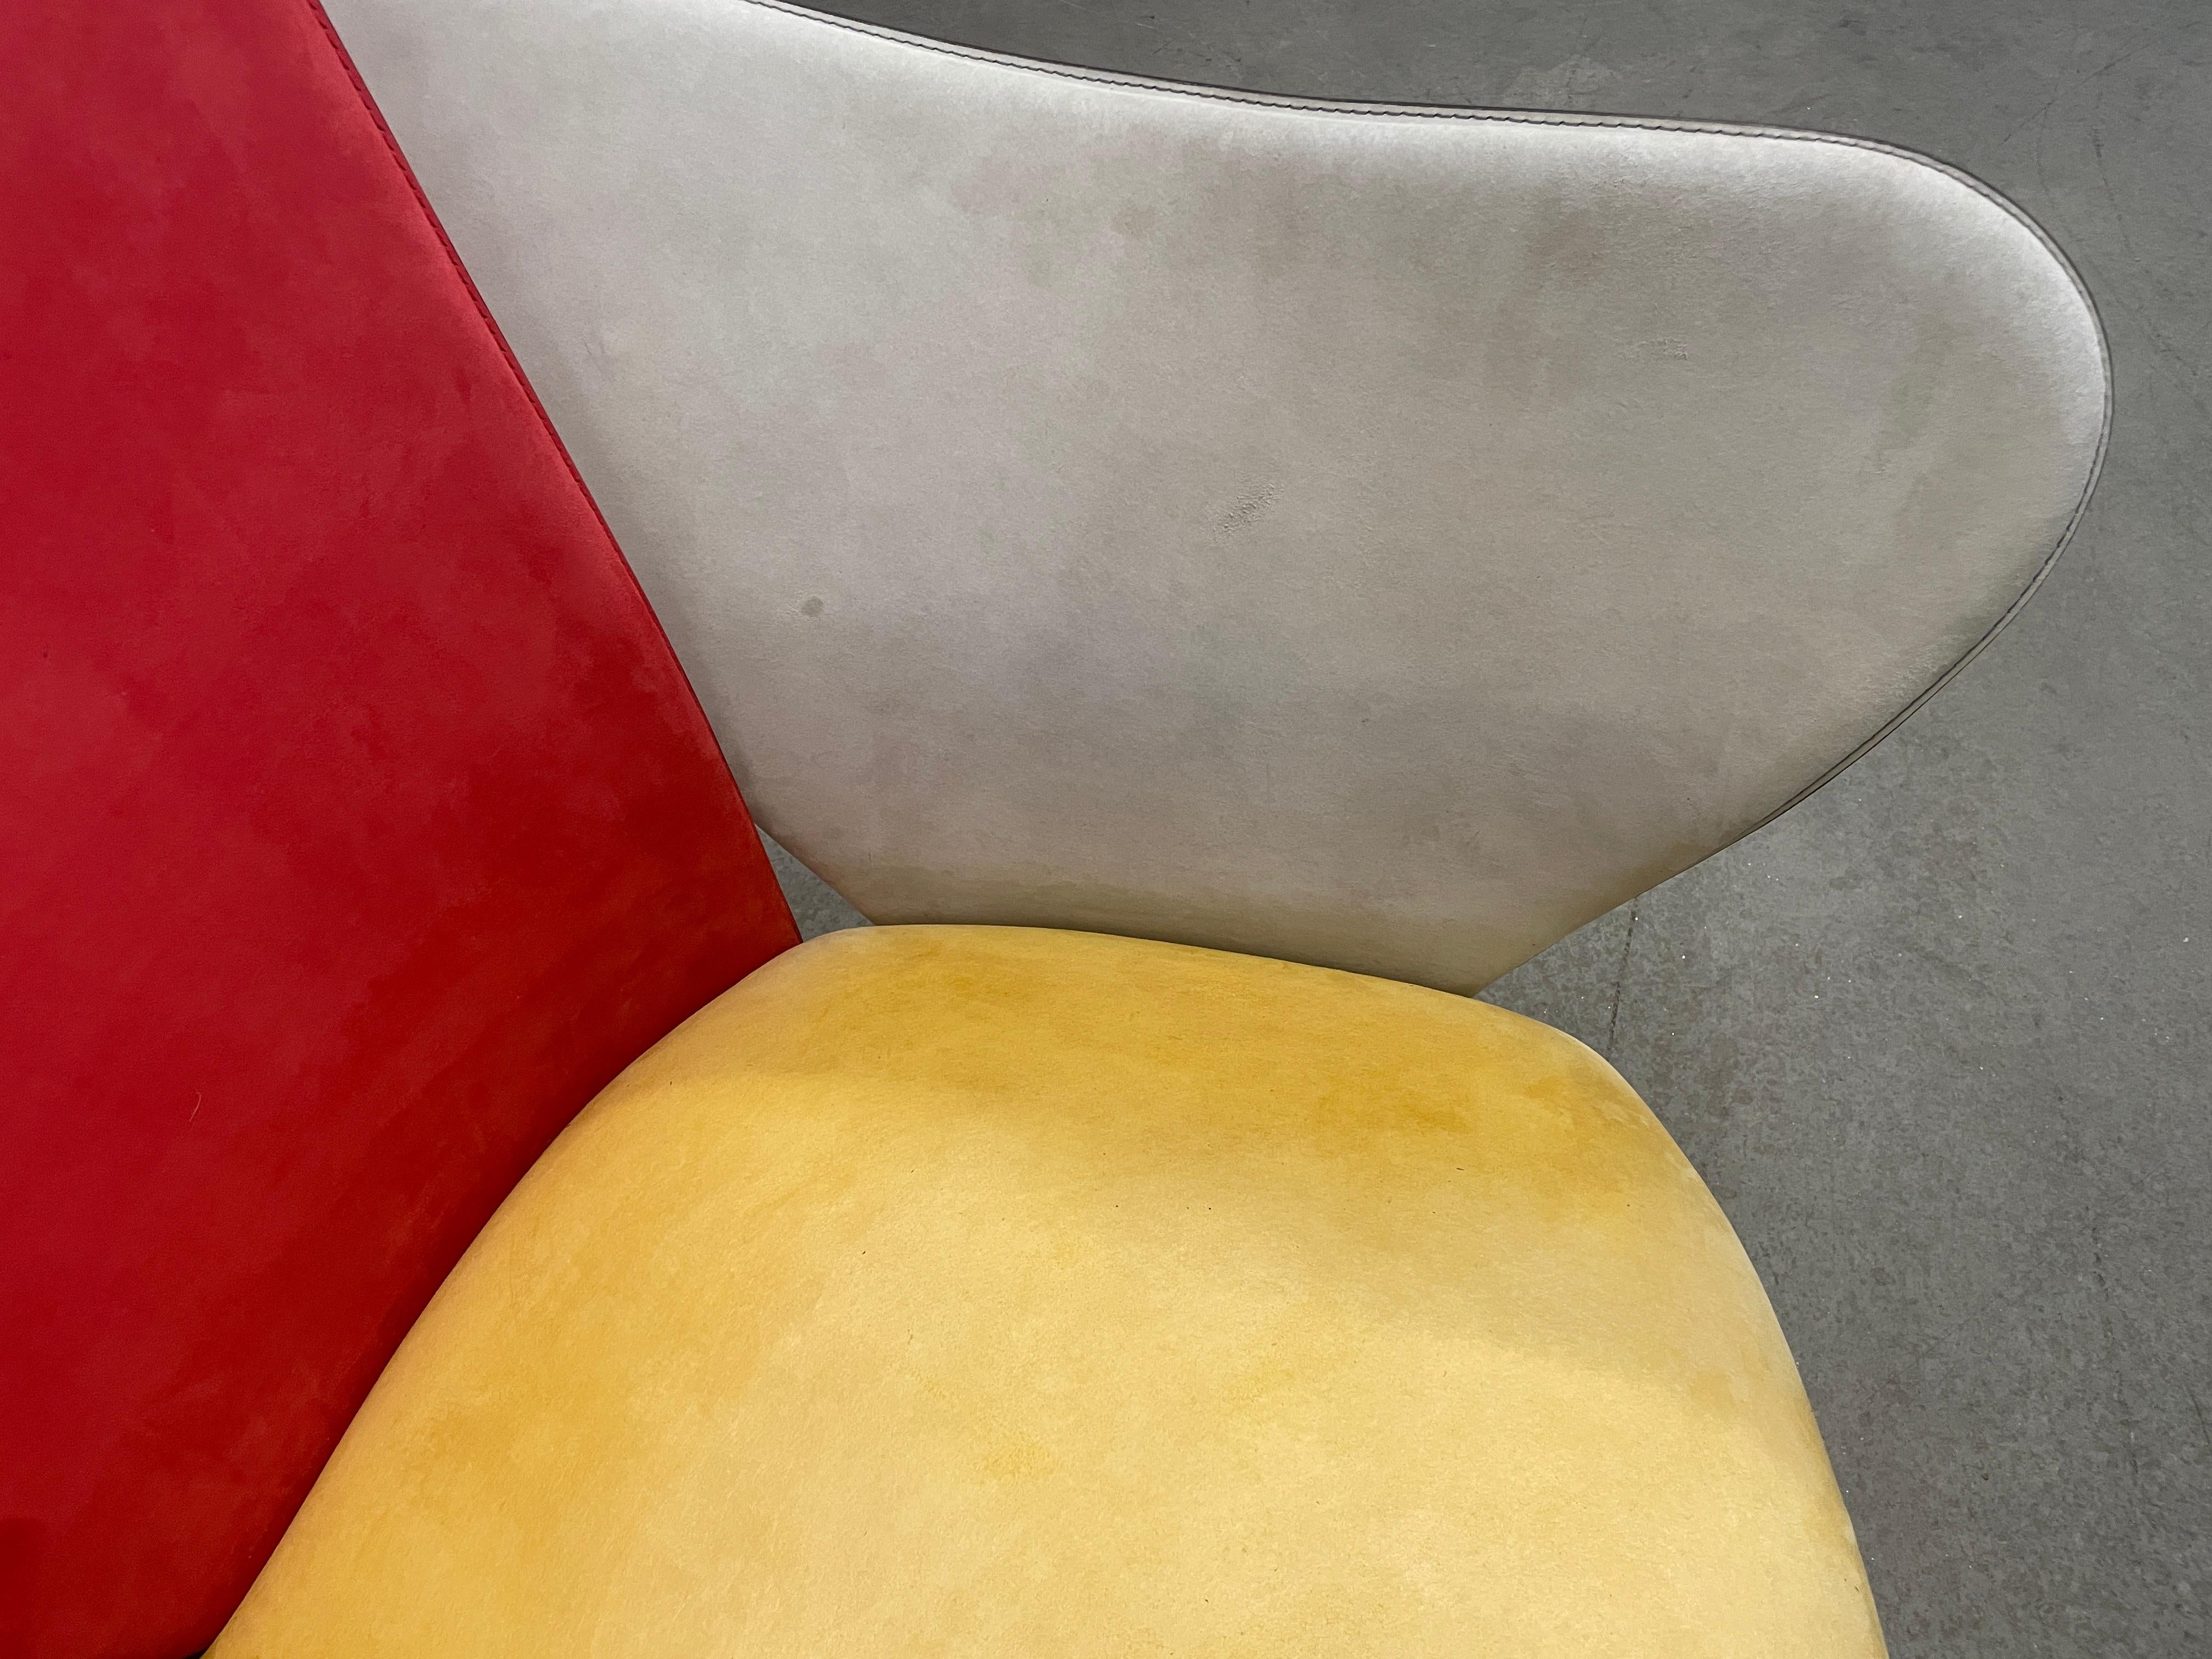 Post-Modern Flower Chair in primary color scheme, designed by Giorgio Saporiti. Made by Il Loft of Italy, circa 1990. Each Saporiti Flower chair is completely unique. The chair's organic 'petals' are made of hand-formed steel shapes. Each piece is